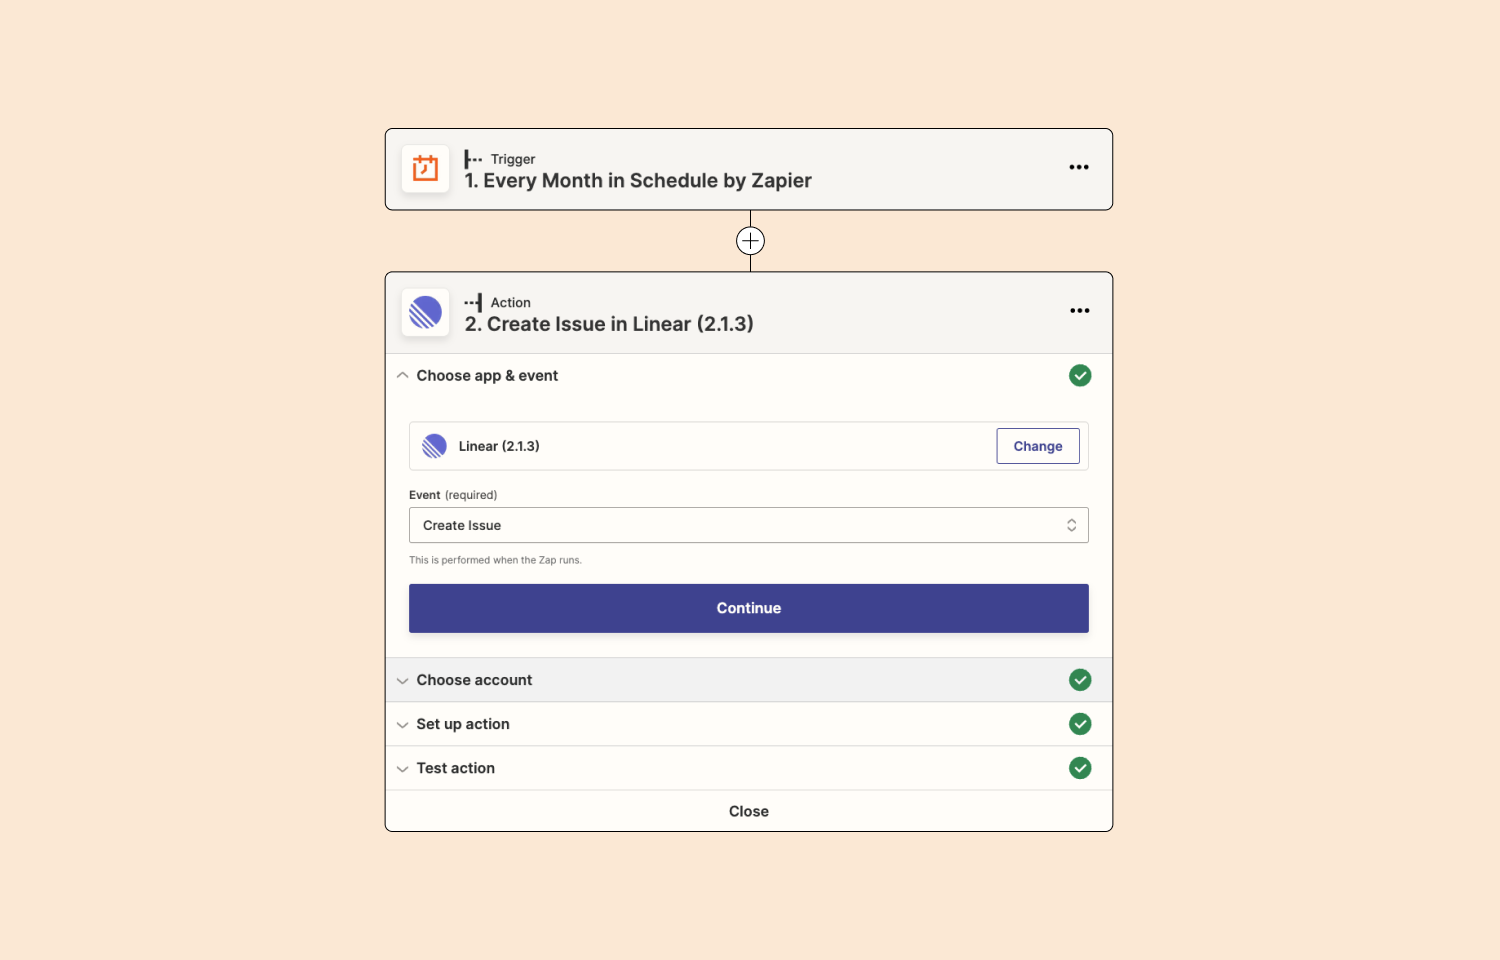 Connecting Zapier's "Every month in Schedule" trigger to create a Linear issue